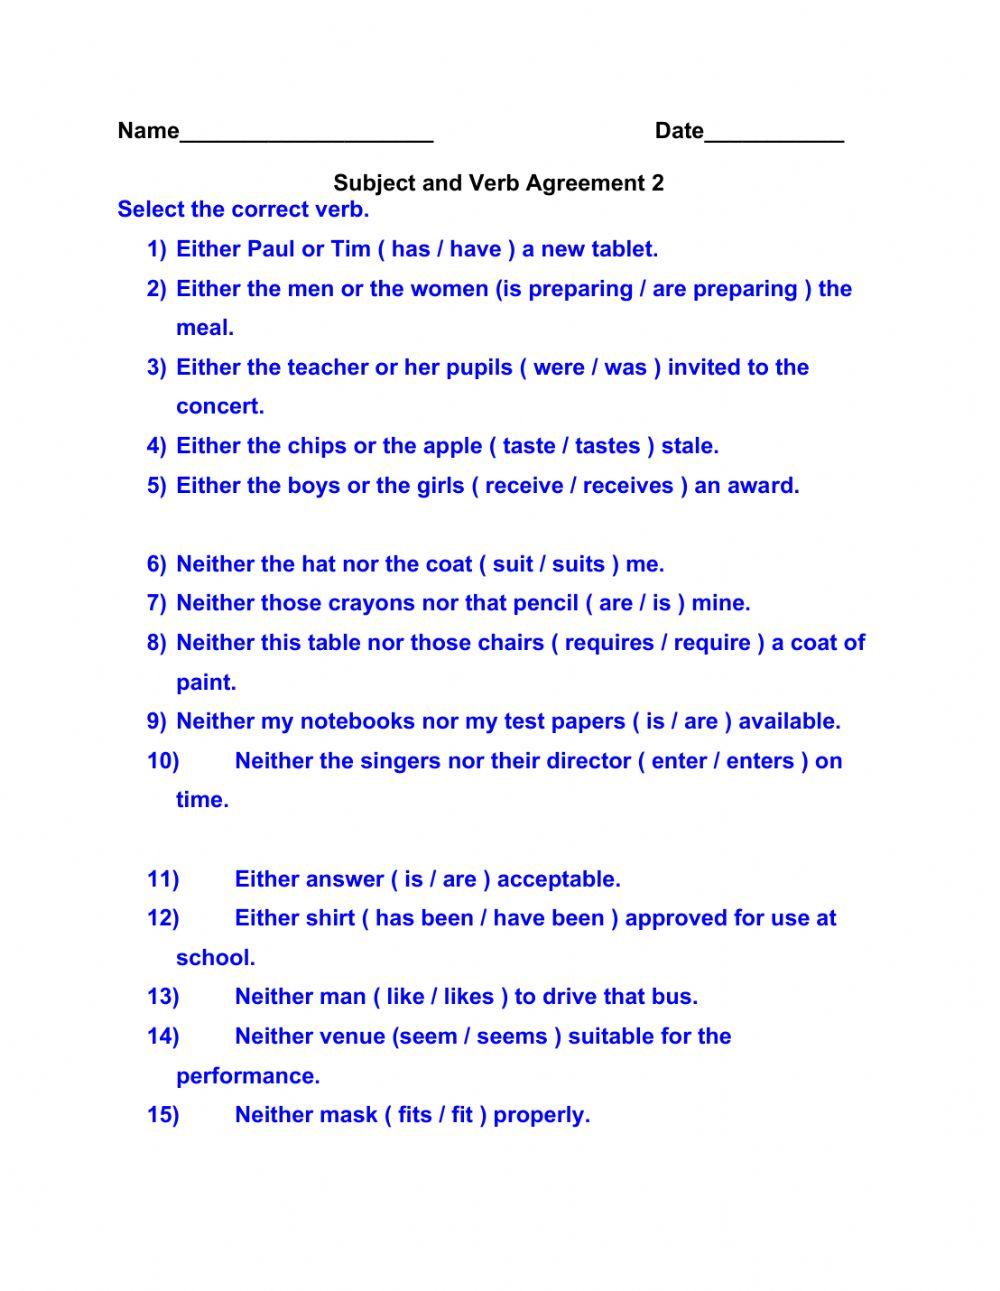 Subject and Verb Agreement 2